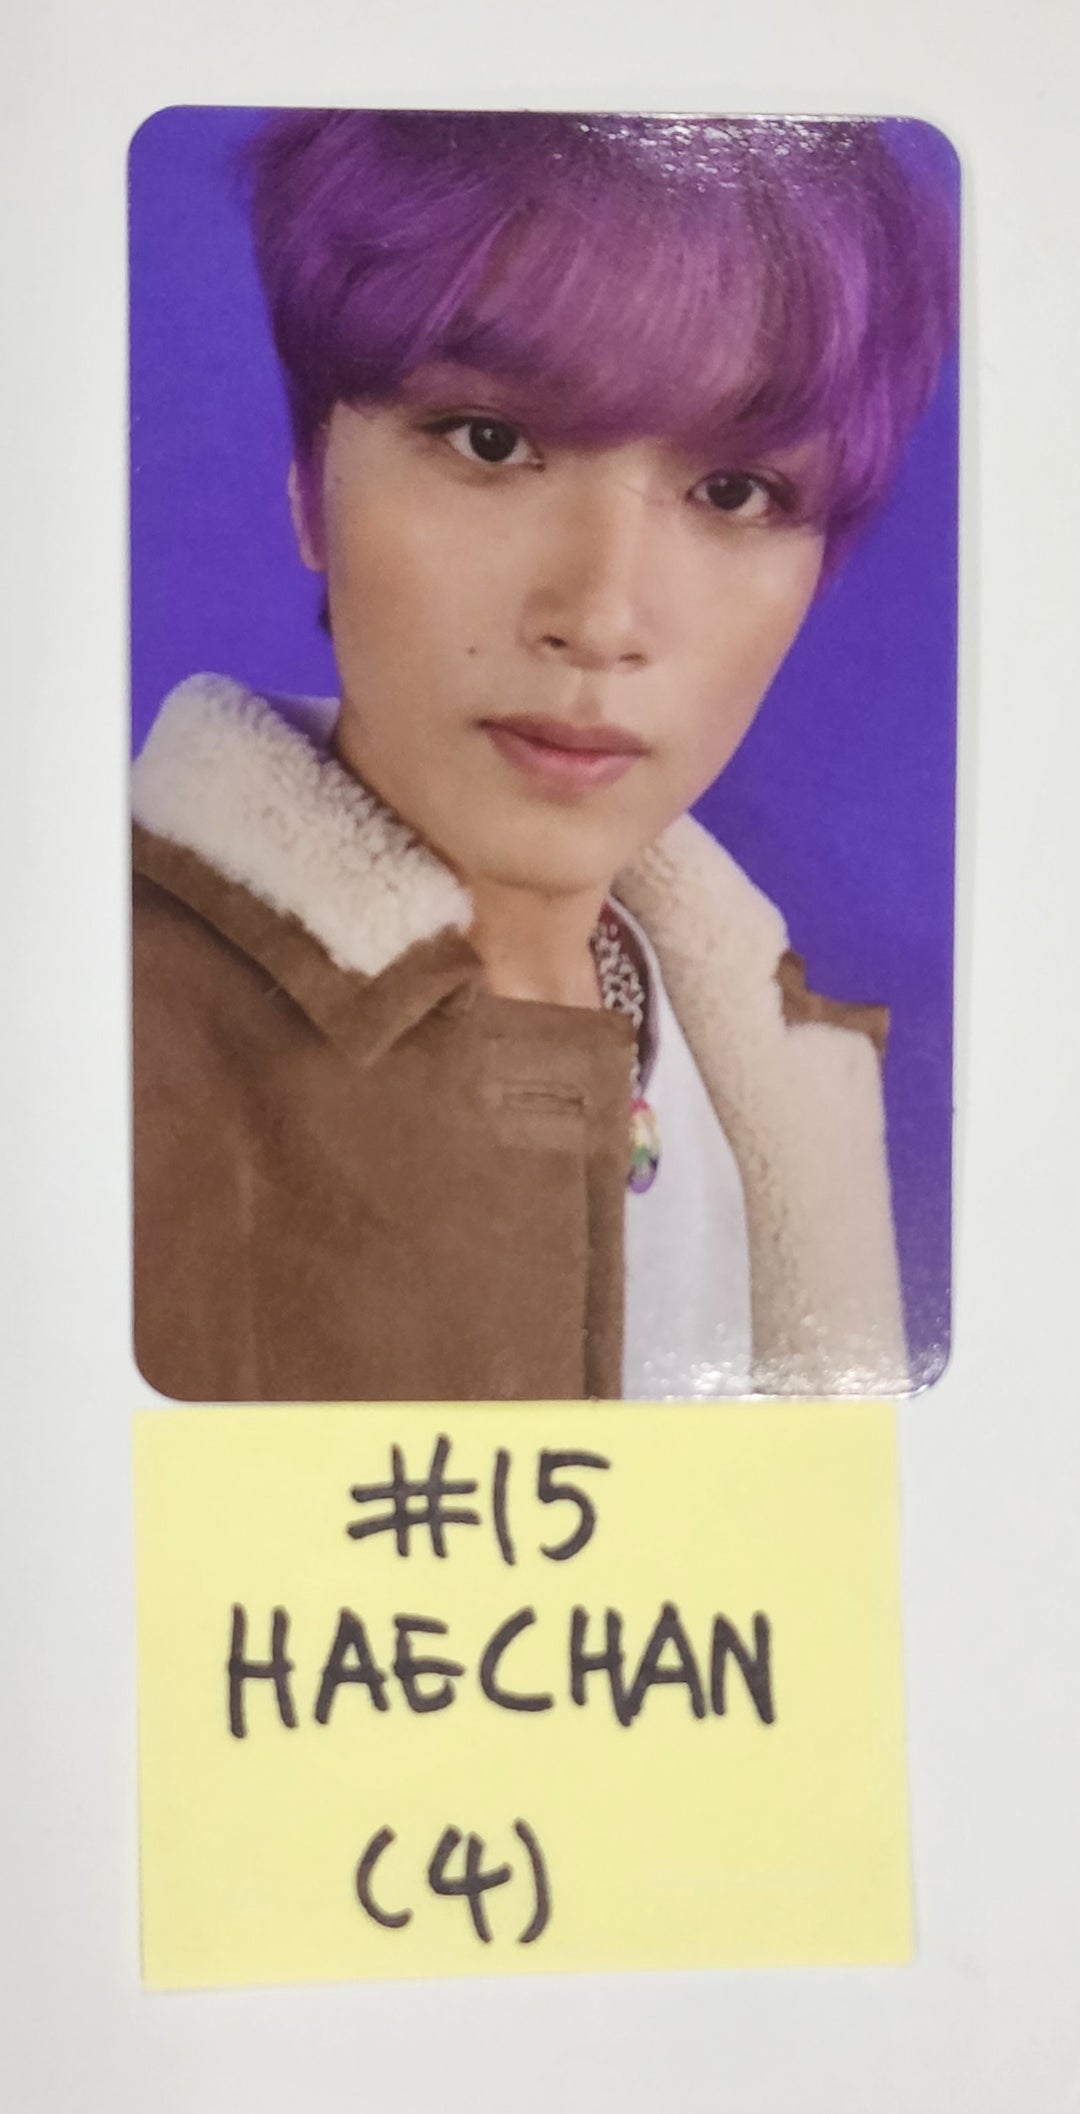 NCT "2022 Winter SMTOWN : SMCU PALACE" - Official Photocard [Membership Card Ver.]